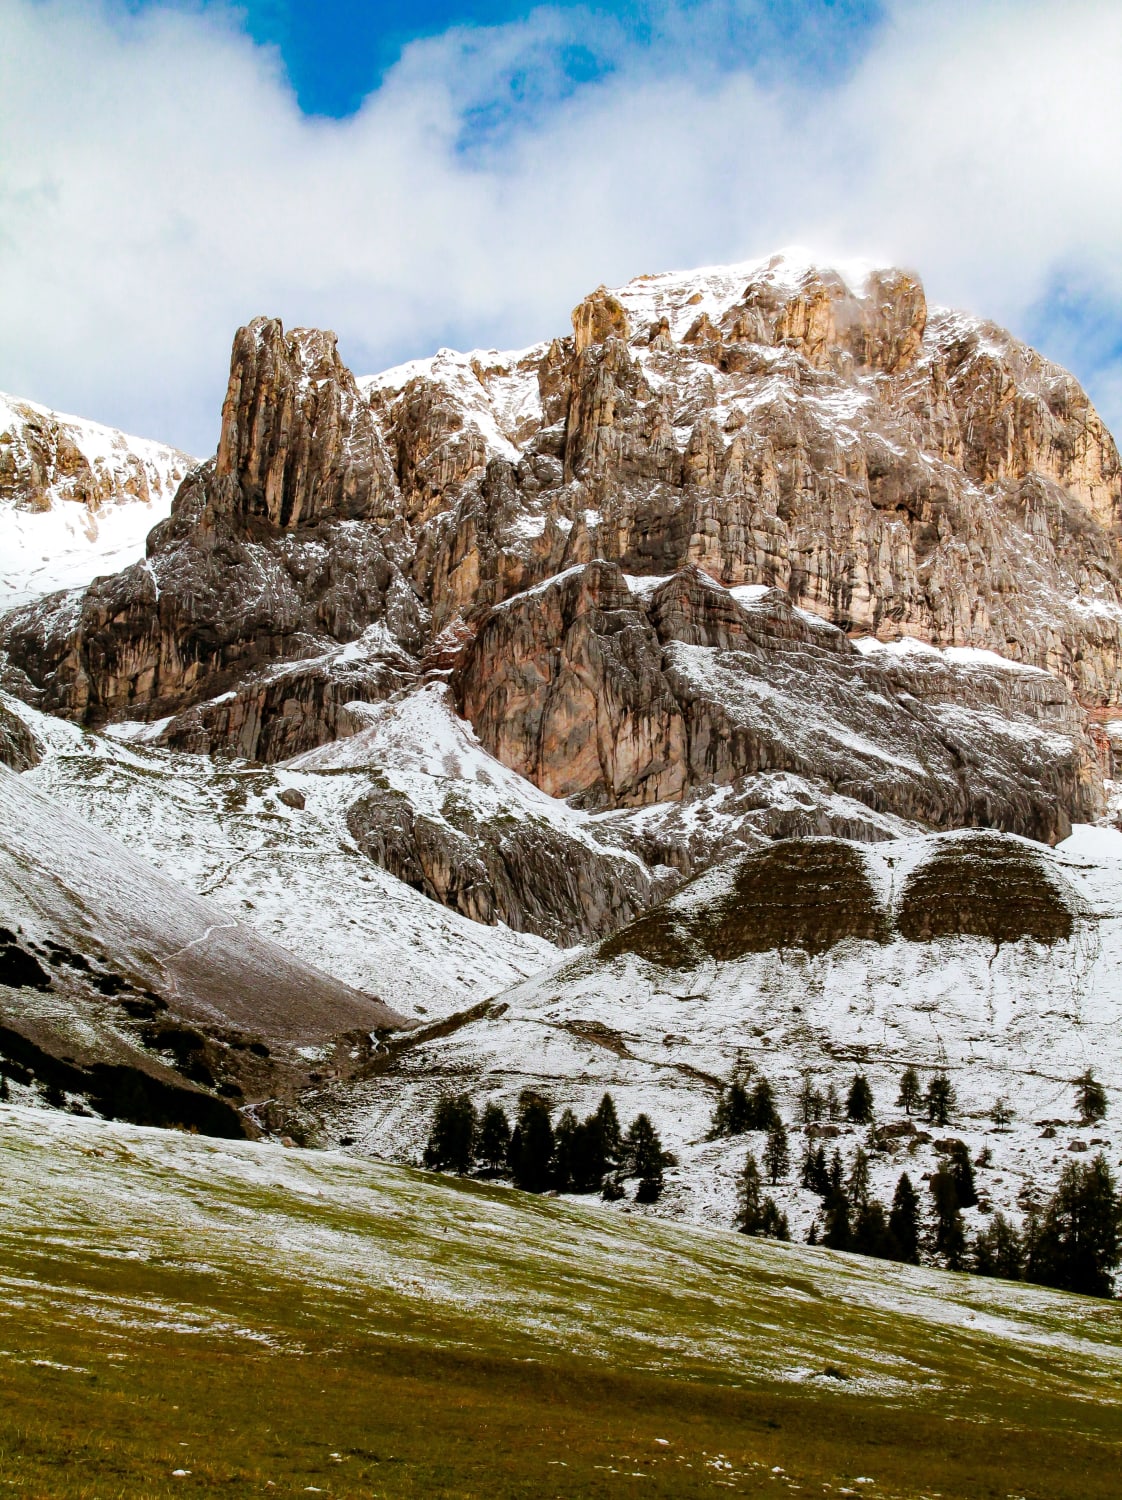 Dusting of snow on the Dolomites, Trentino Italy (Photo credit to Sebastiano Piazzi)